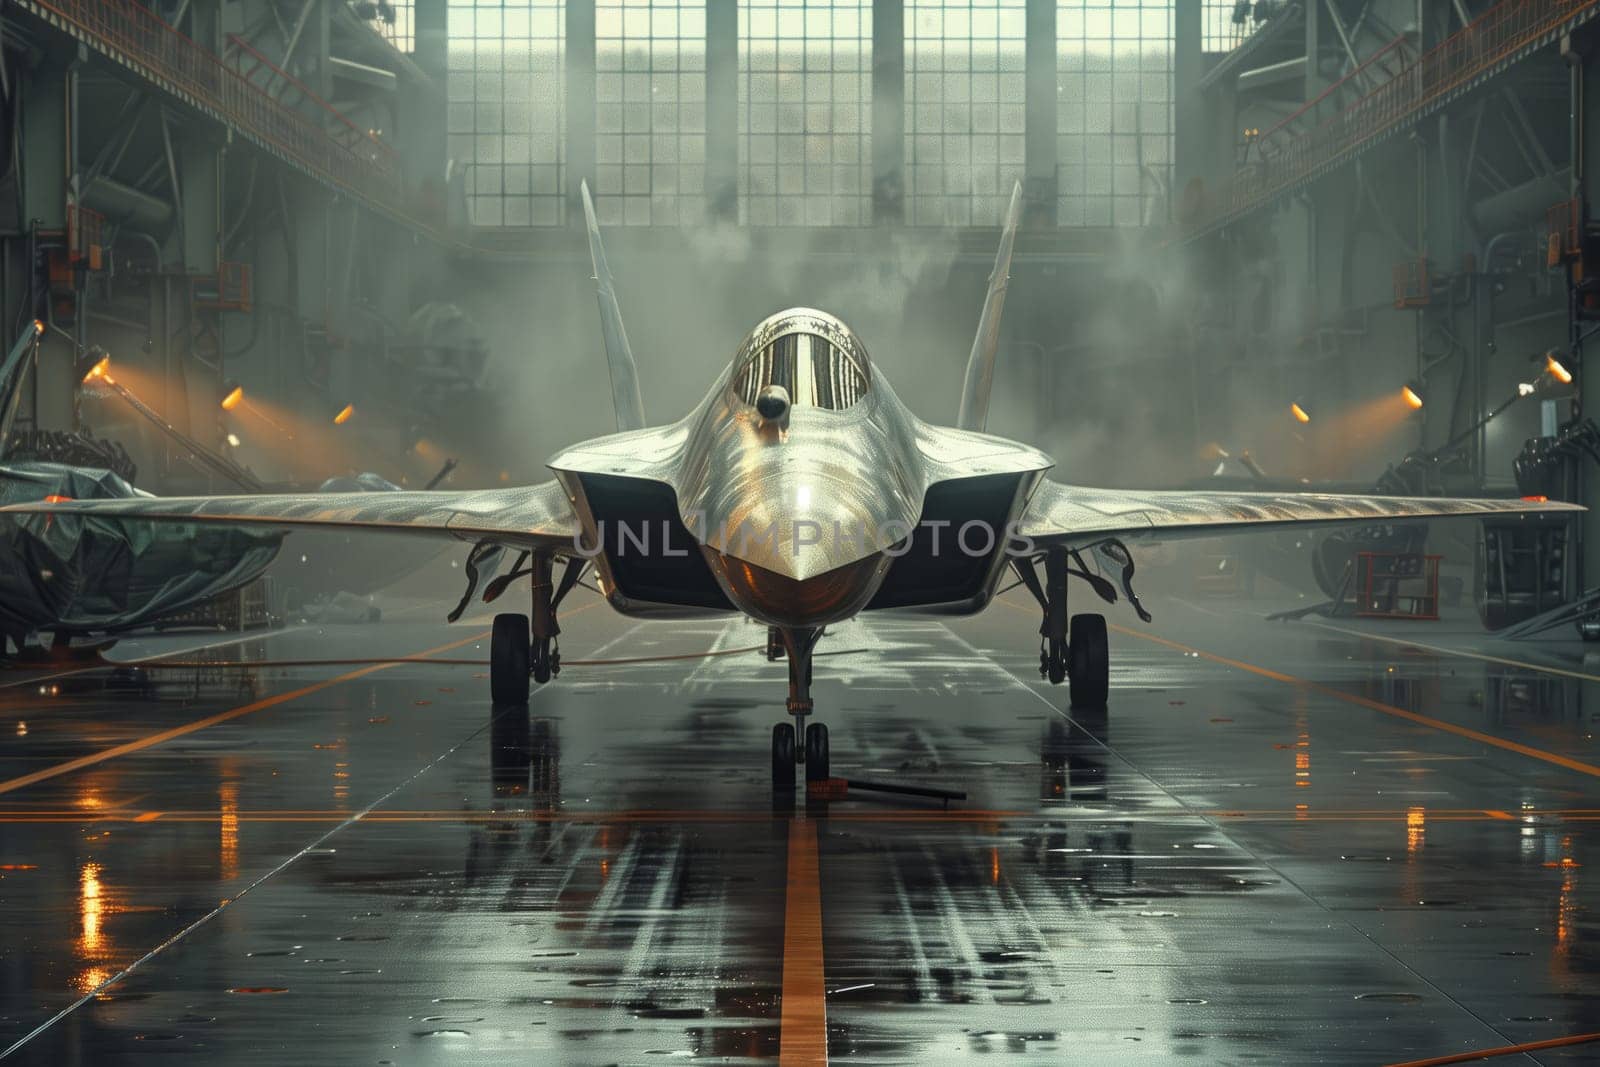 An aircraft is parked in an aerospace manufacturers hangar by richwolf